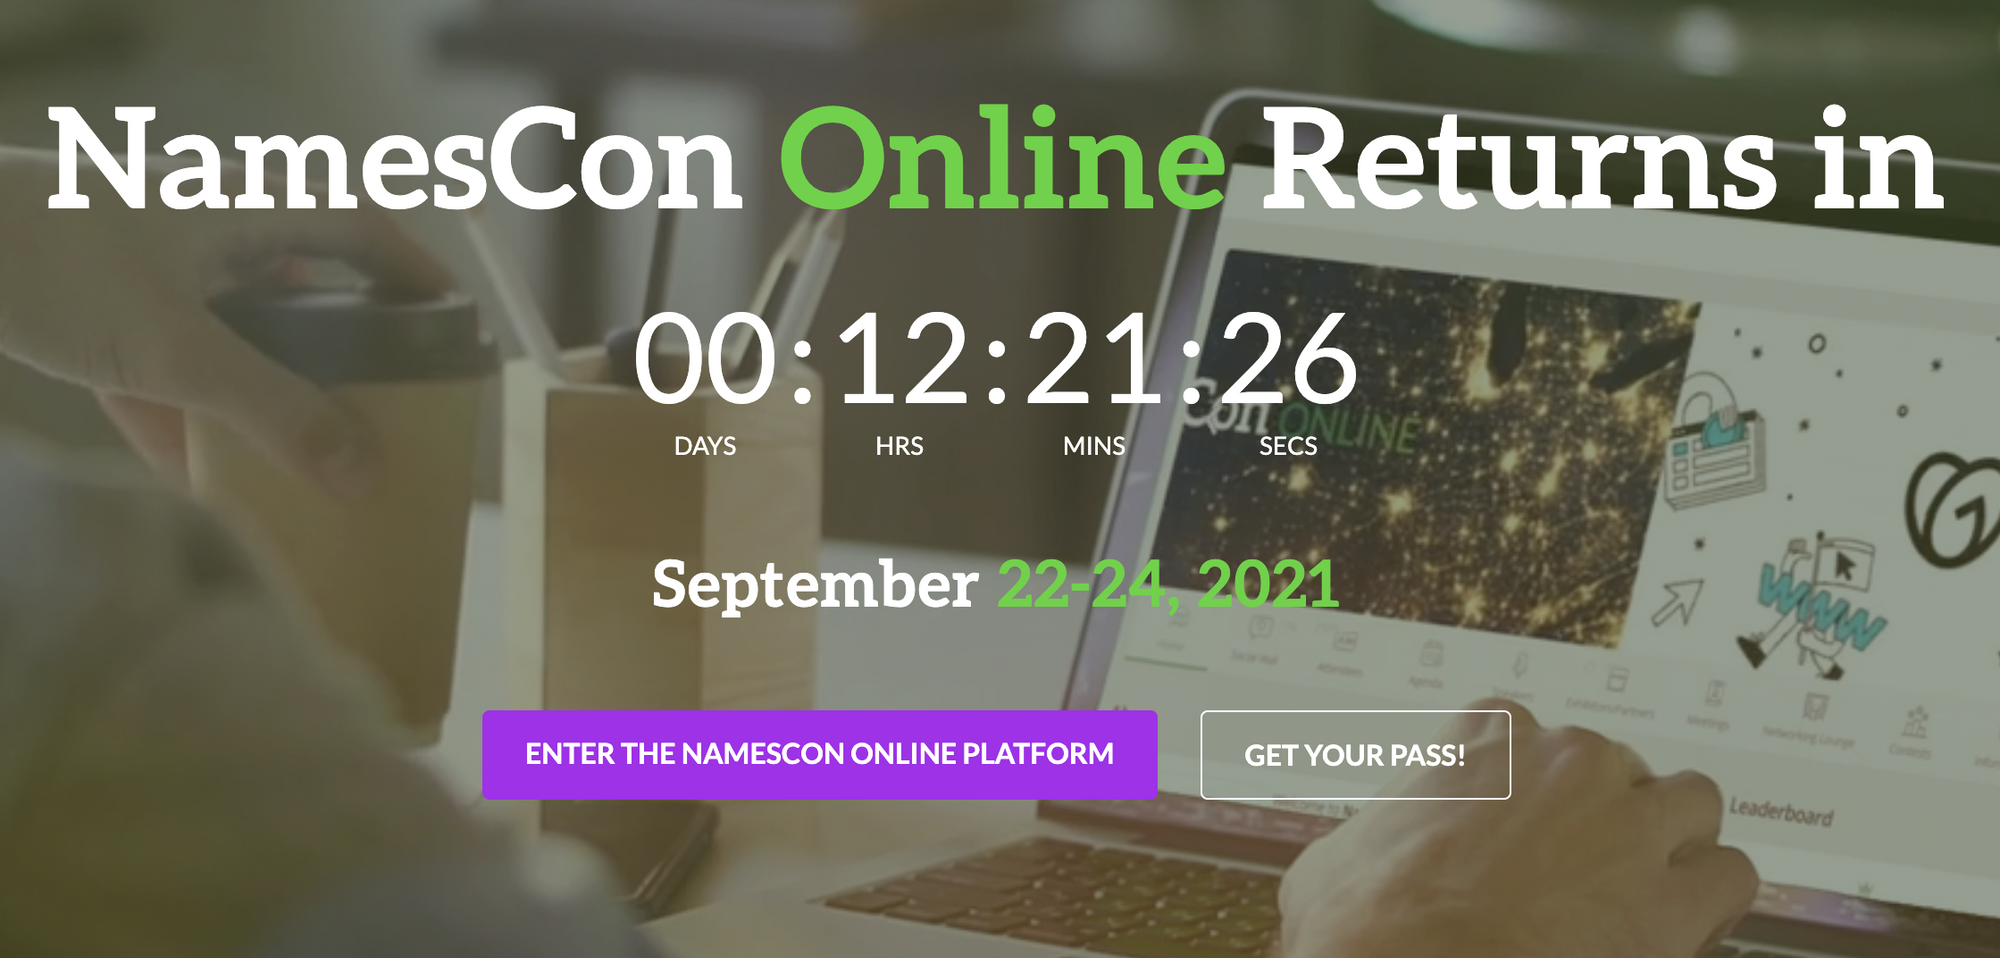 NamesCon Online kicks off tomorrow, here’s a few things to have on your radar